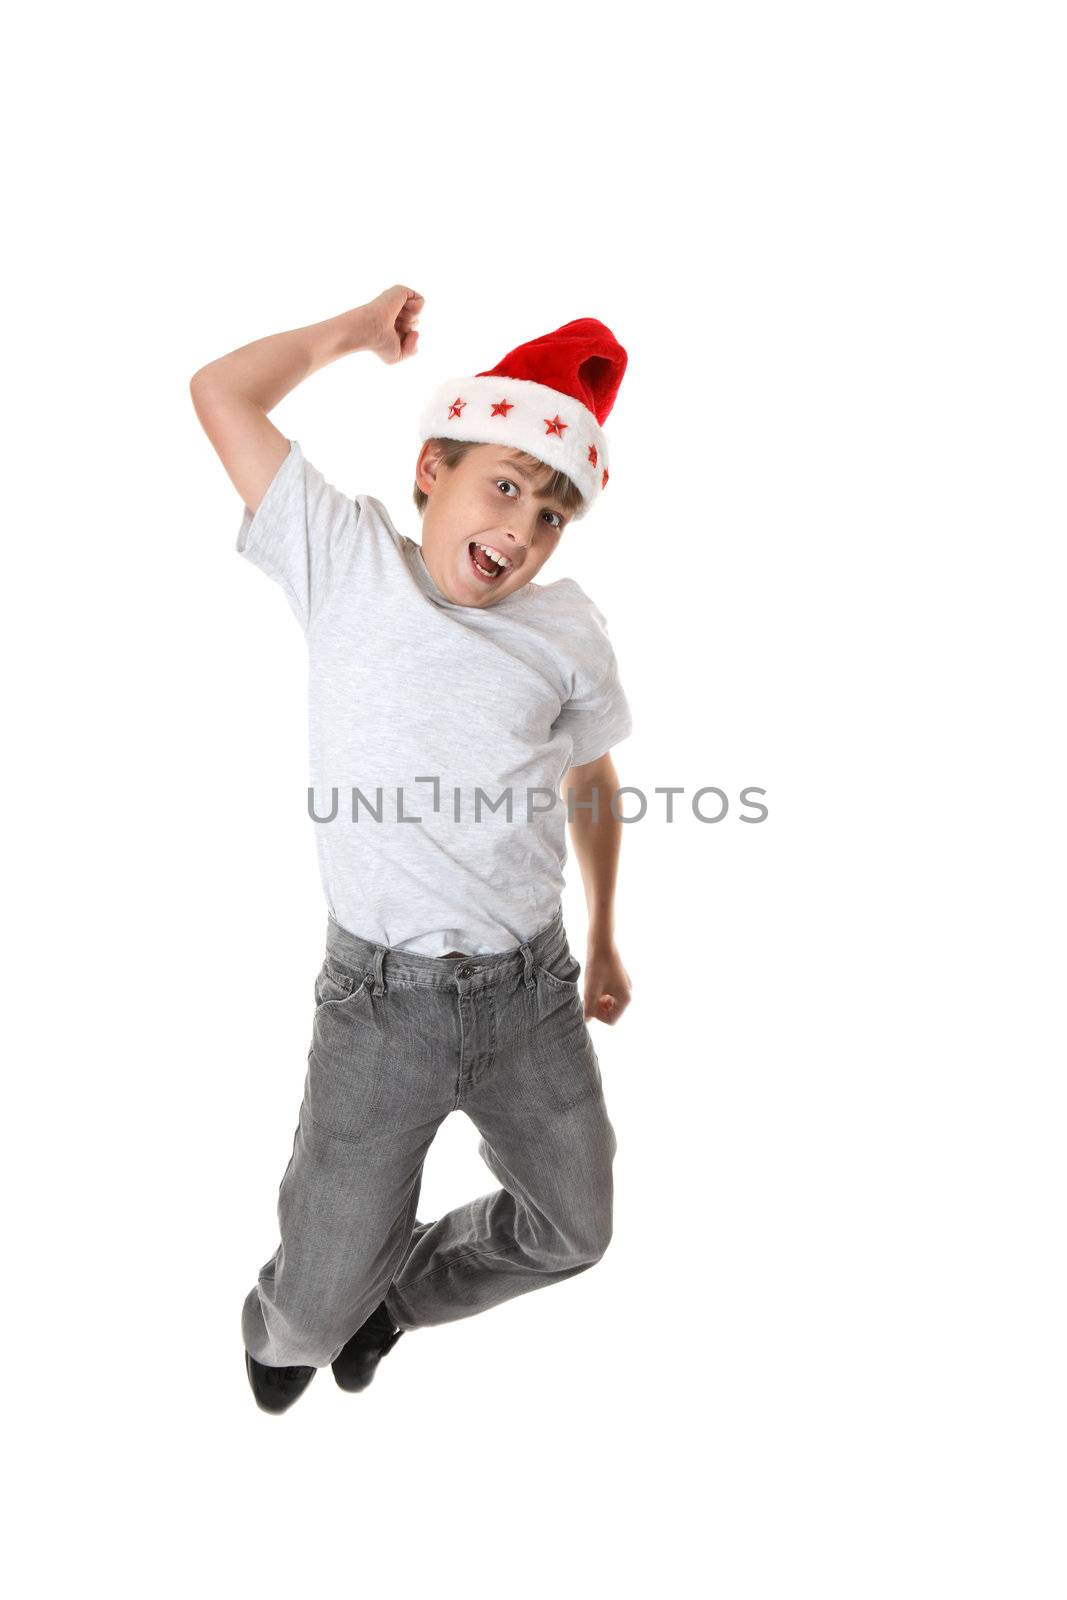 A child leaping into the air in celebration of Christmas